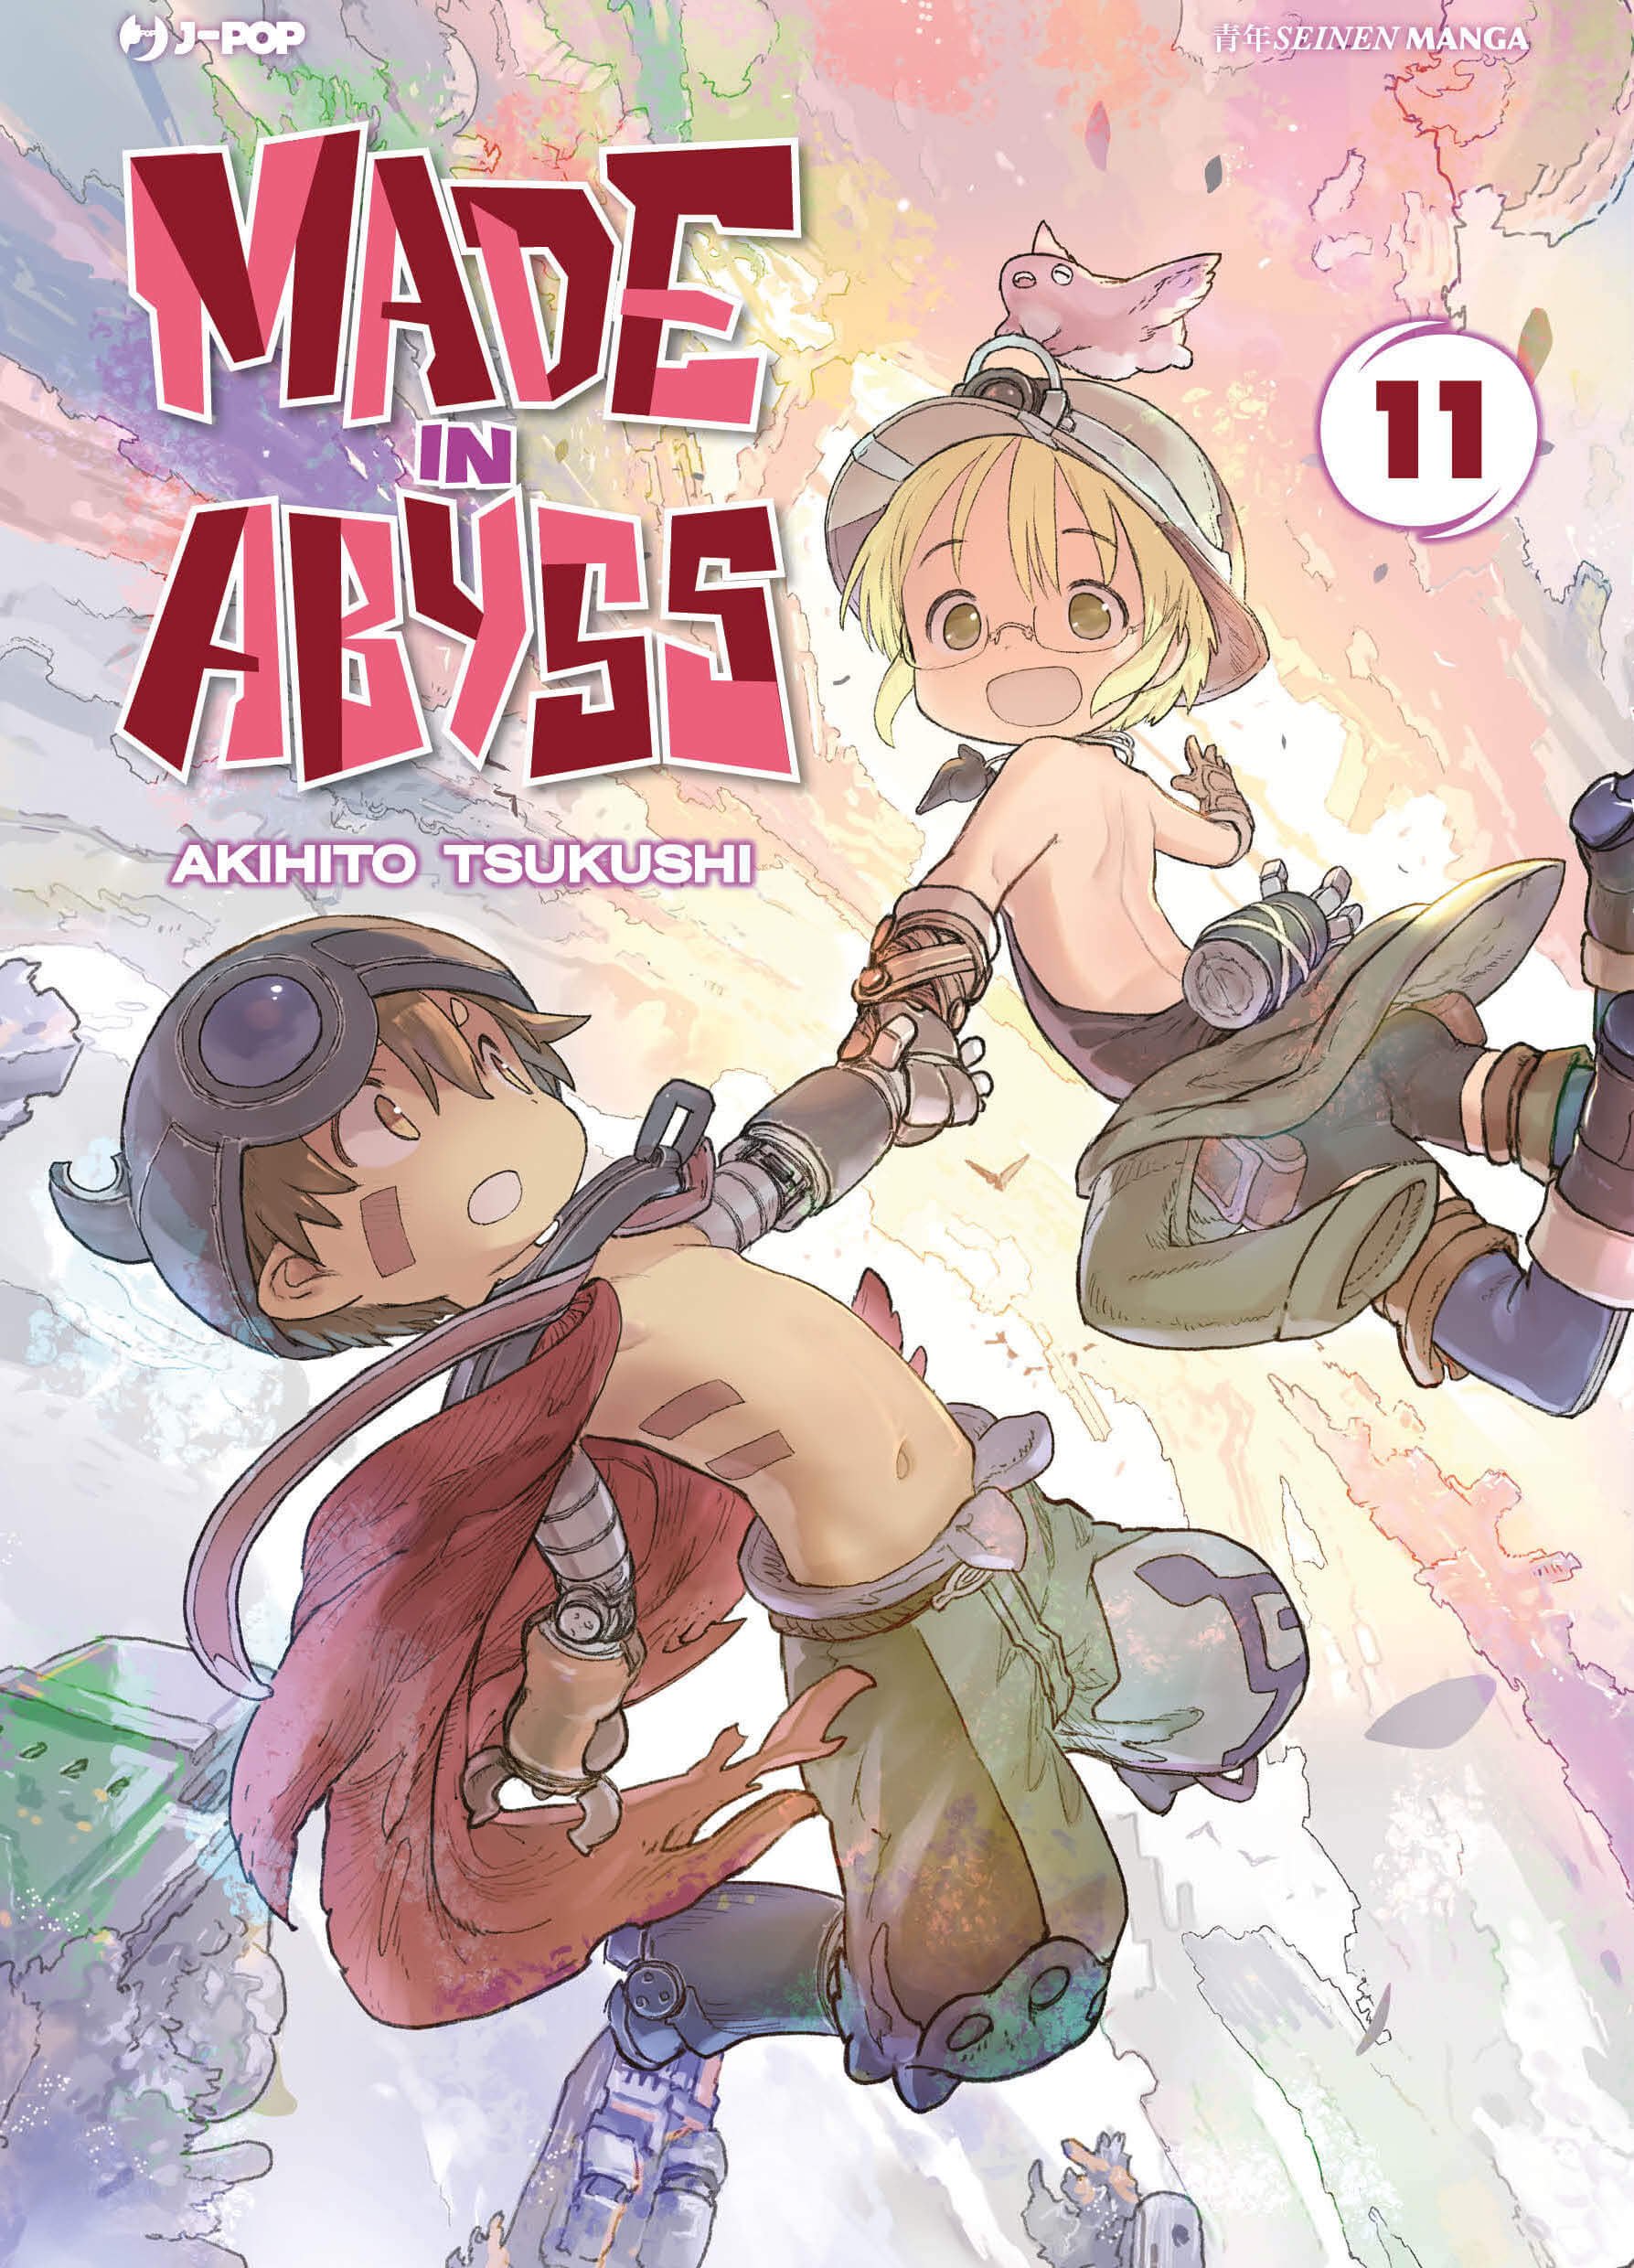 Made in Abyss 11, tra le uscite J-POP Manga dell’11 gennaio 2023